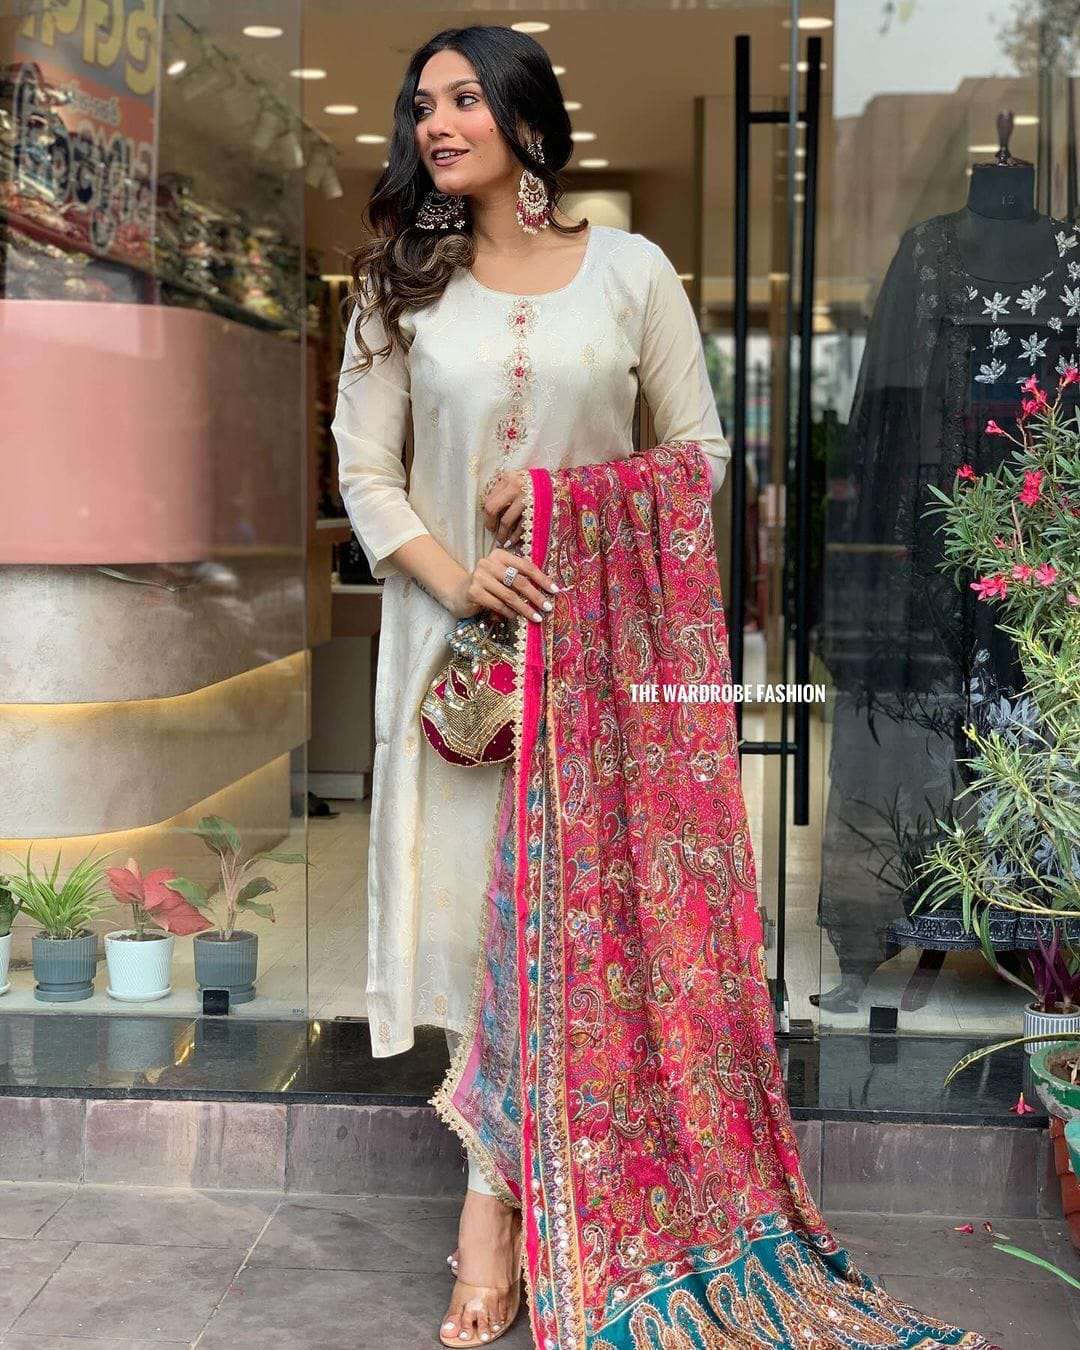 new beutiful heavy fully stitchied suit set brand showroom piece jacuard viwing full work featuring beautiful heavy suit set which is beautifully decorated with intricate hand embroidery zari weaving